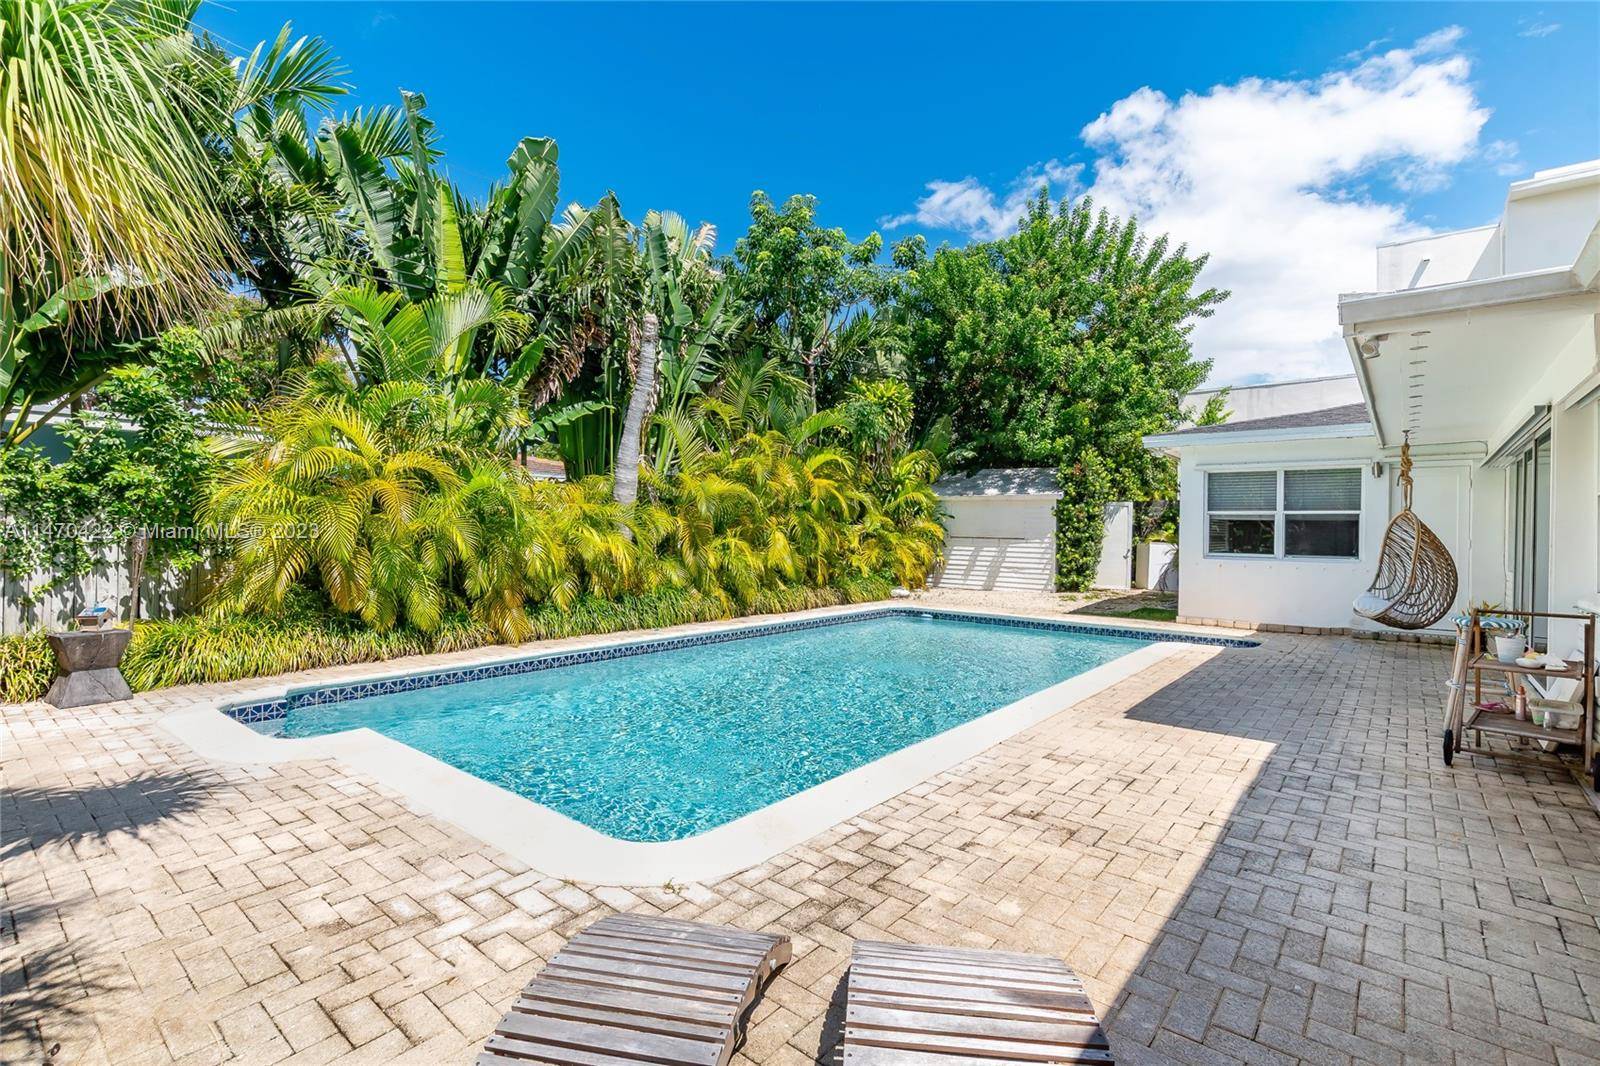 Welcome to this spacious 5 bedroom, 3 bathroom house located in the prestigious Key Biscayne area, perfect for large families.